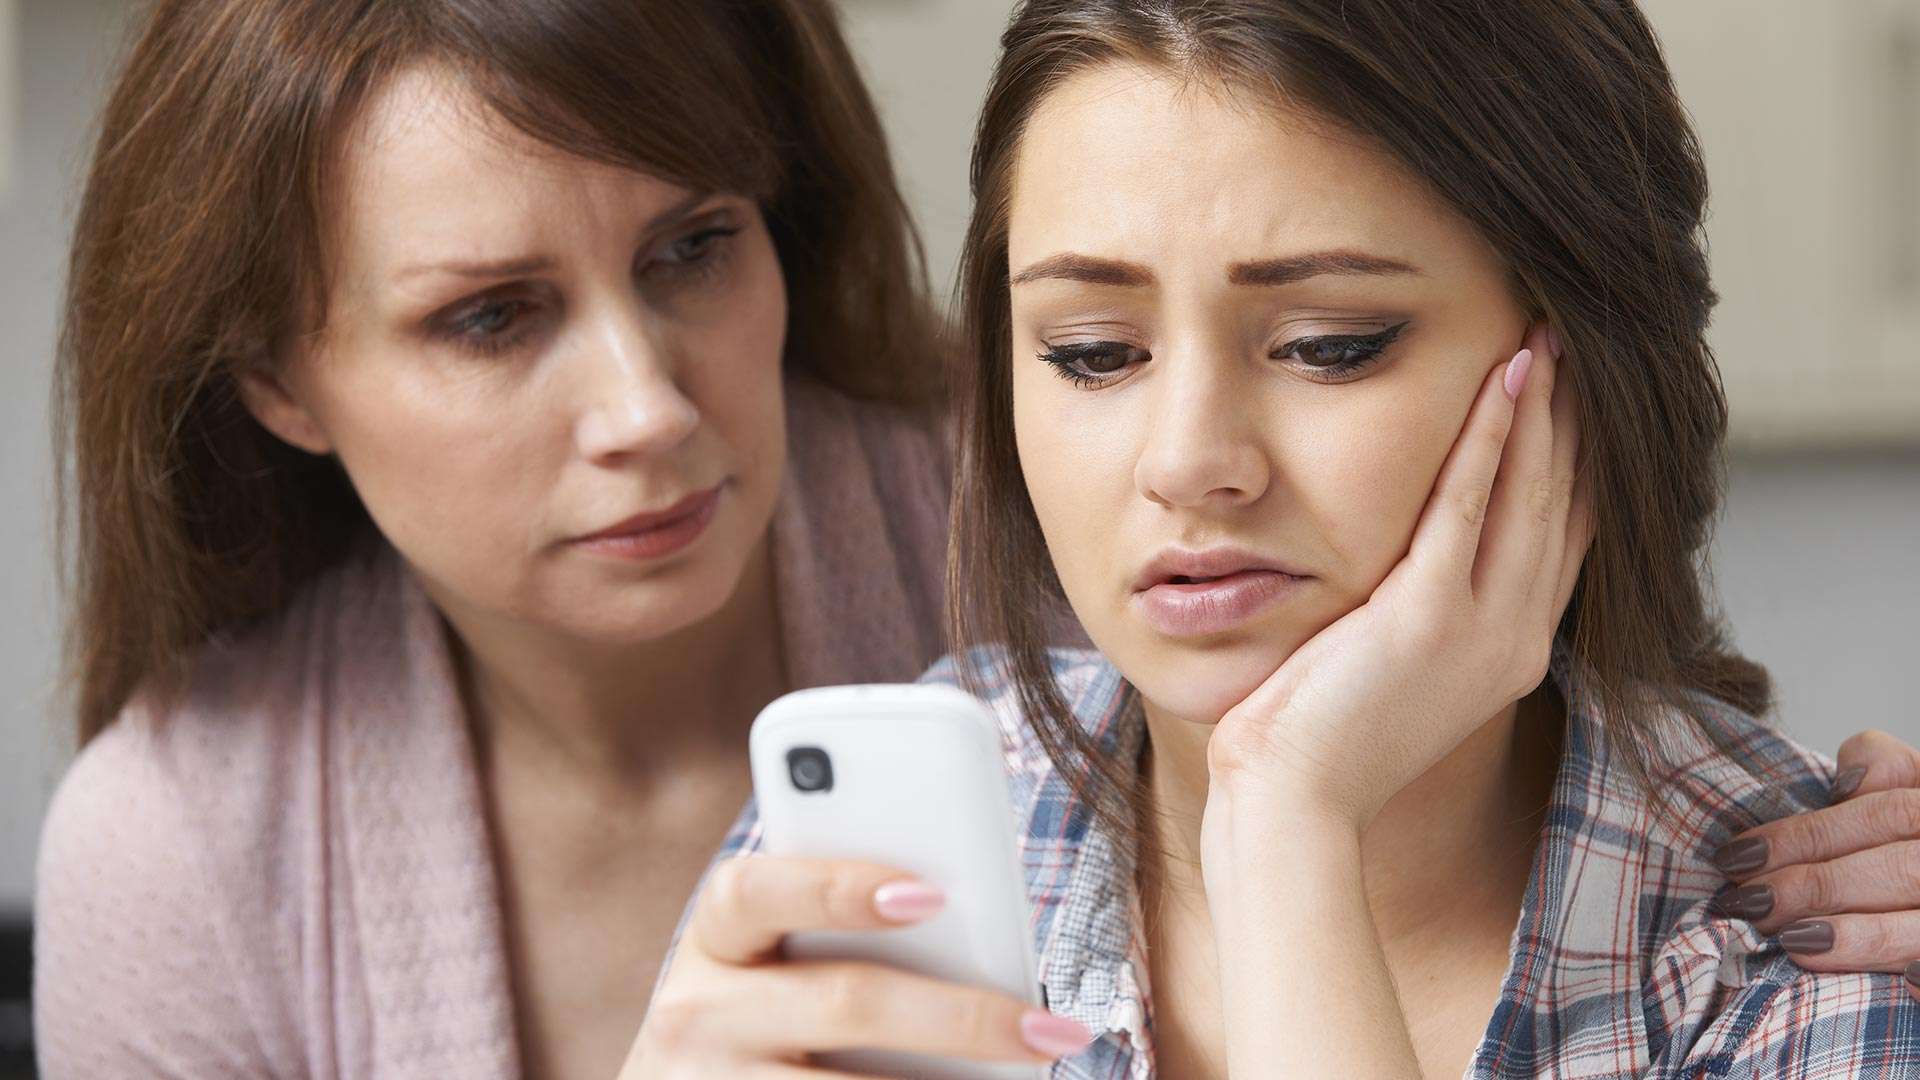 What Parents Should do About Cyberbullying and How to Protect with Parental Monitoring Apps (image)